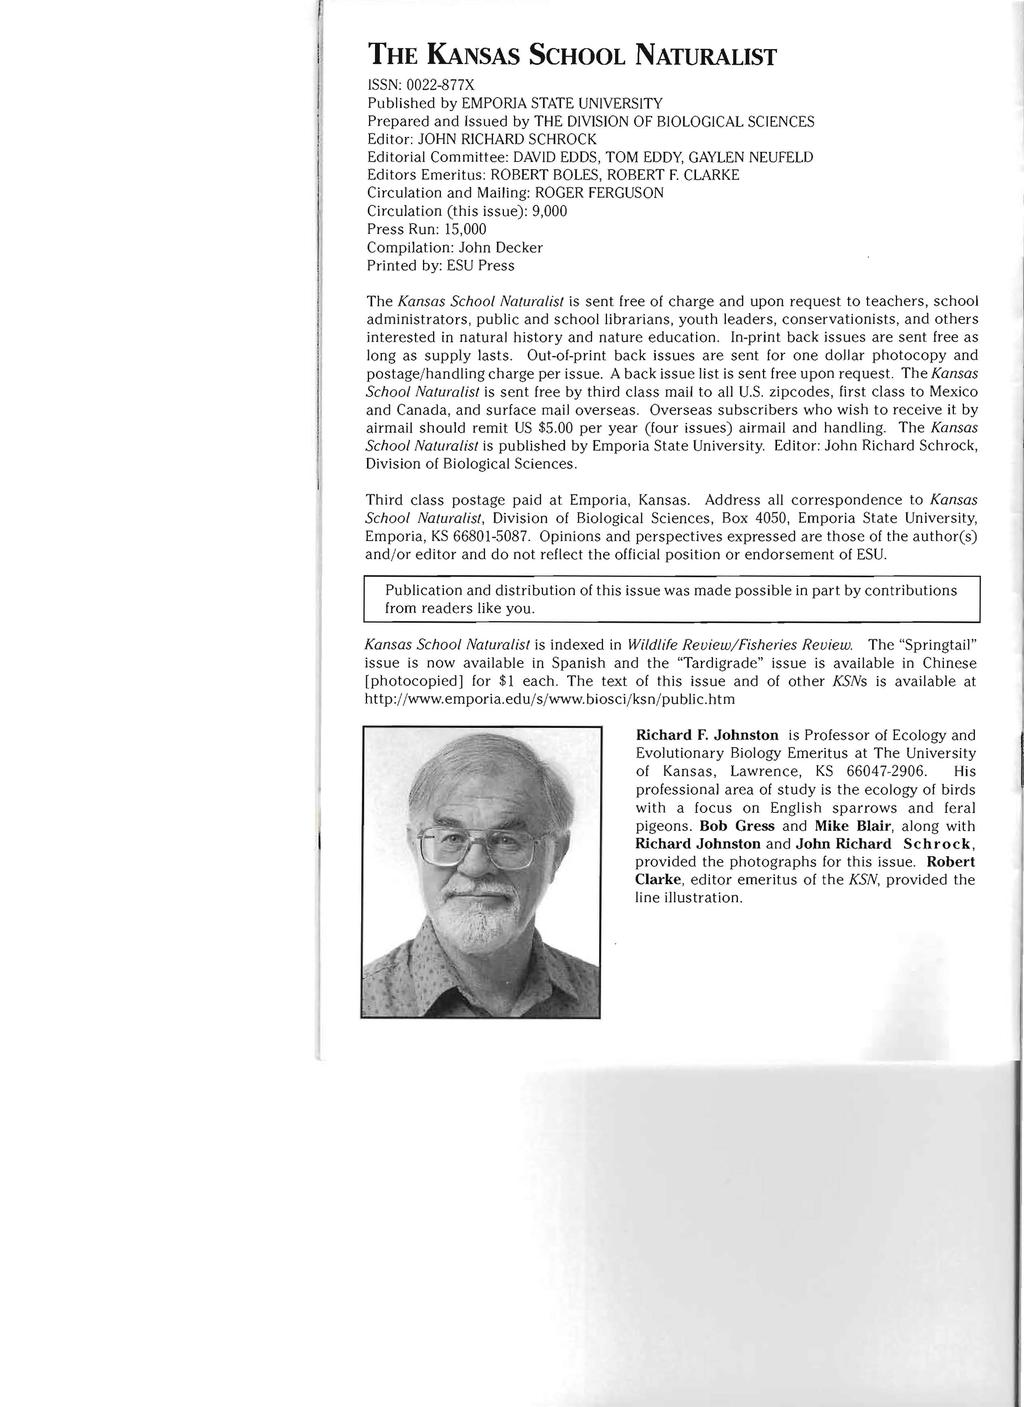 THE KANSAS SCHOOL NATURALIST ISSN: 0022-877X Published by EMPORlA STATE UNIVERSITY Prepared and Issued by THE DIVISION OF BIOLOGICAL SCIENCES Editor: JOHN RICHARD SCHROCK Editorial Committee: DAVID